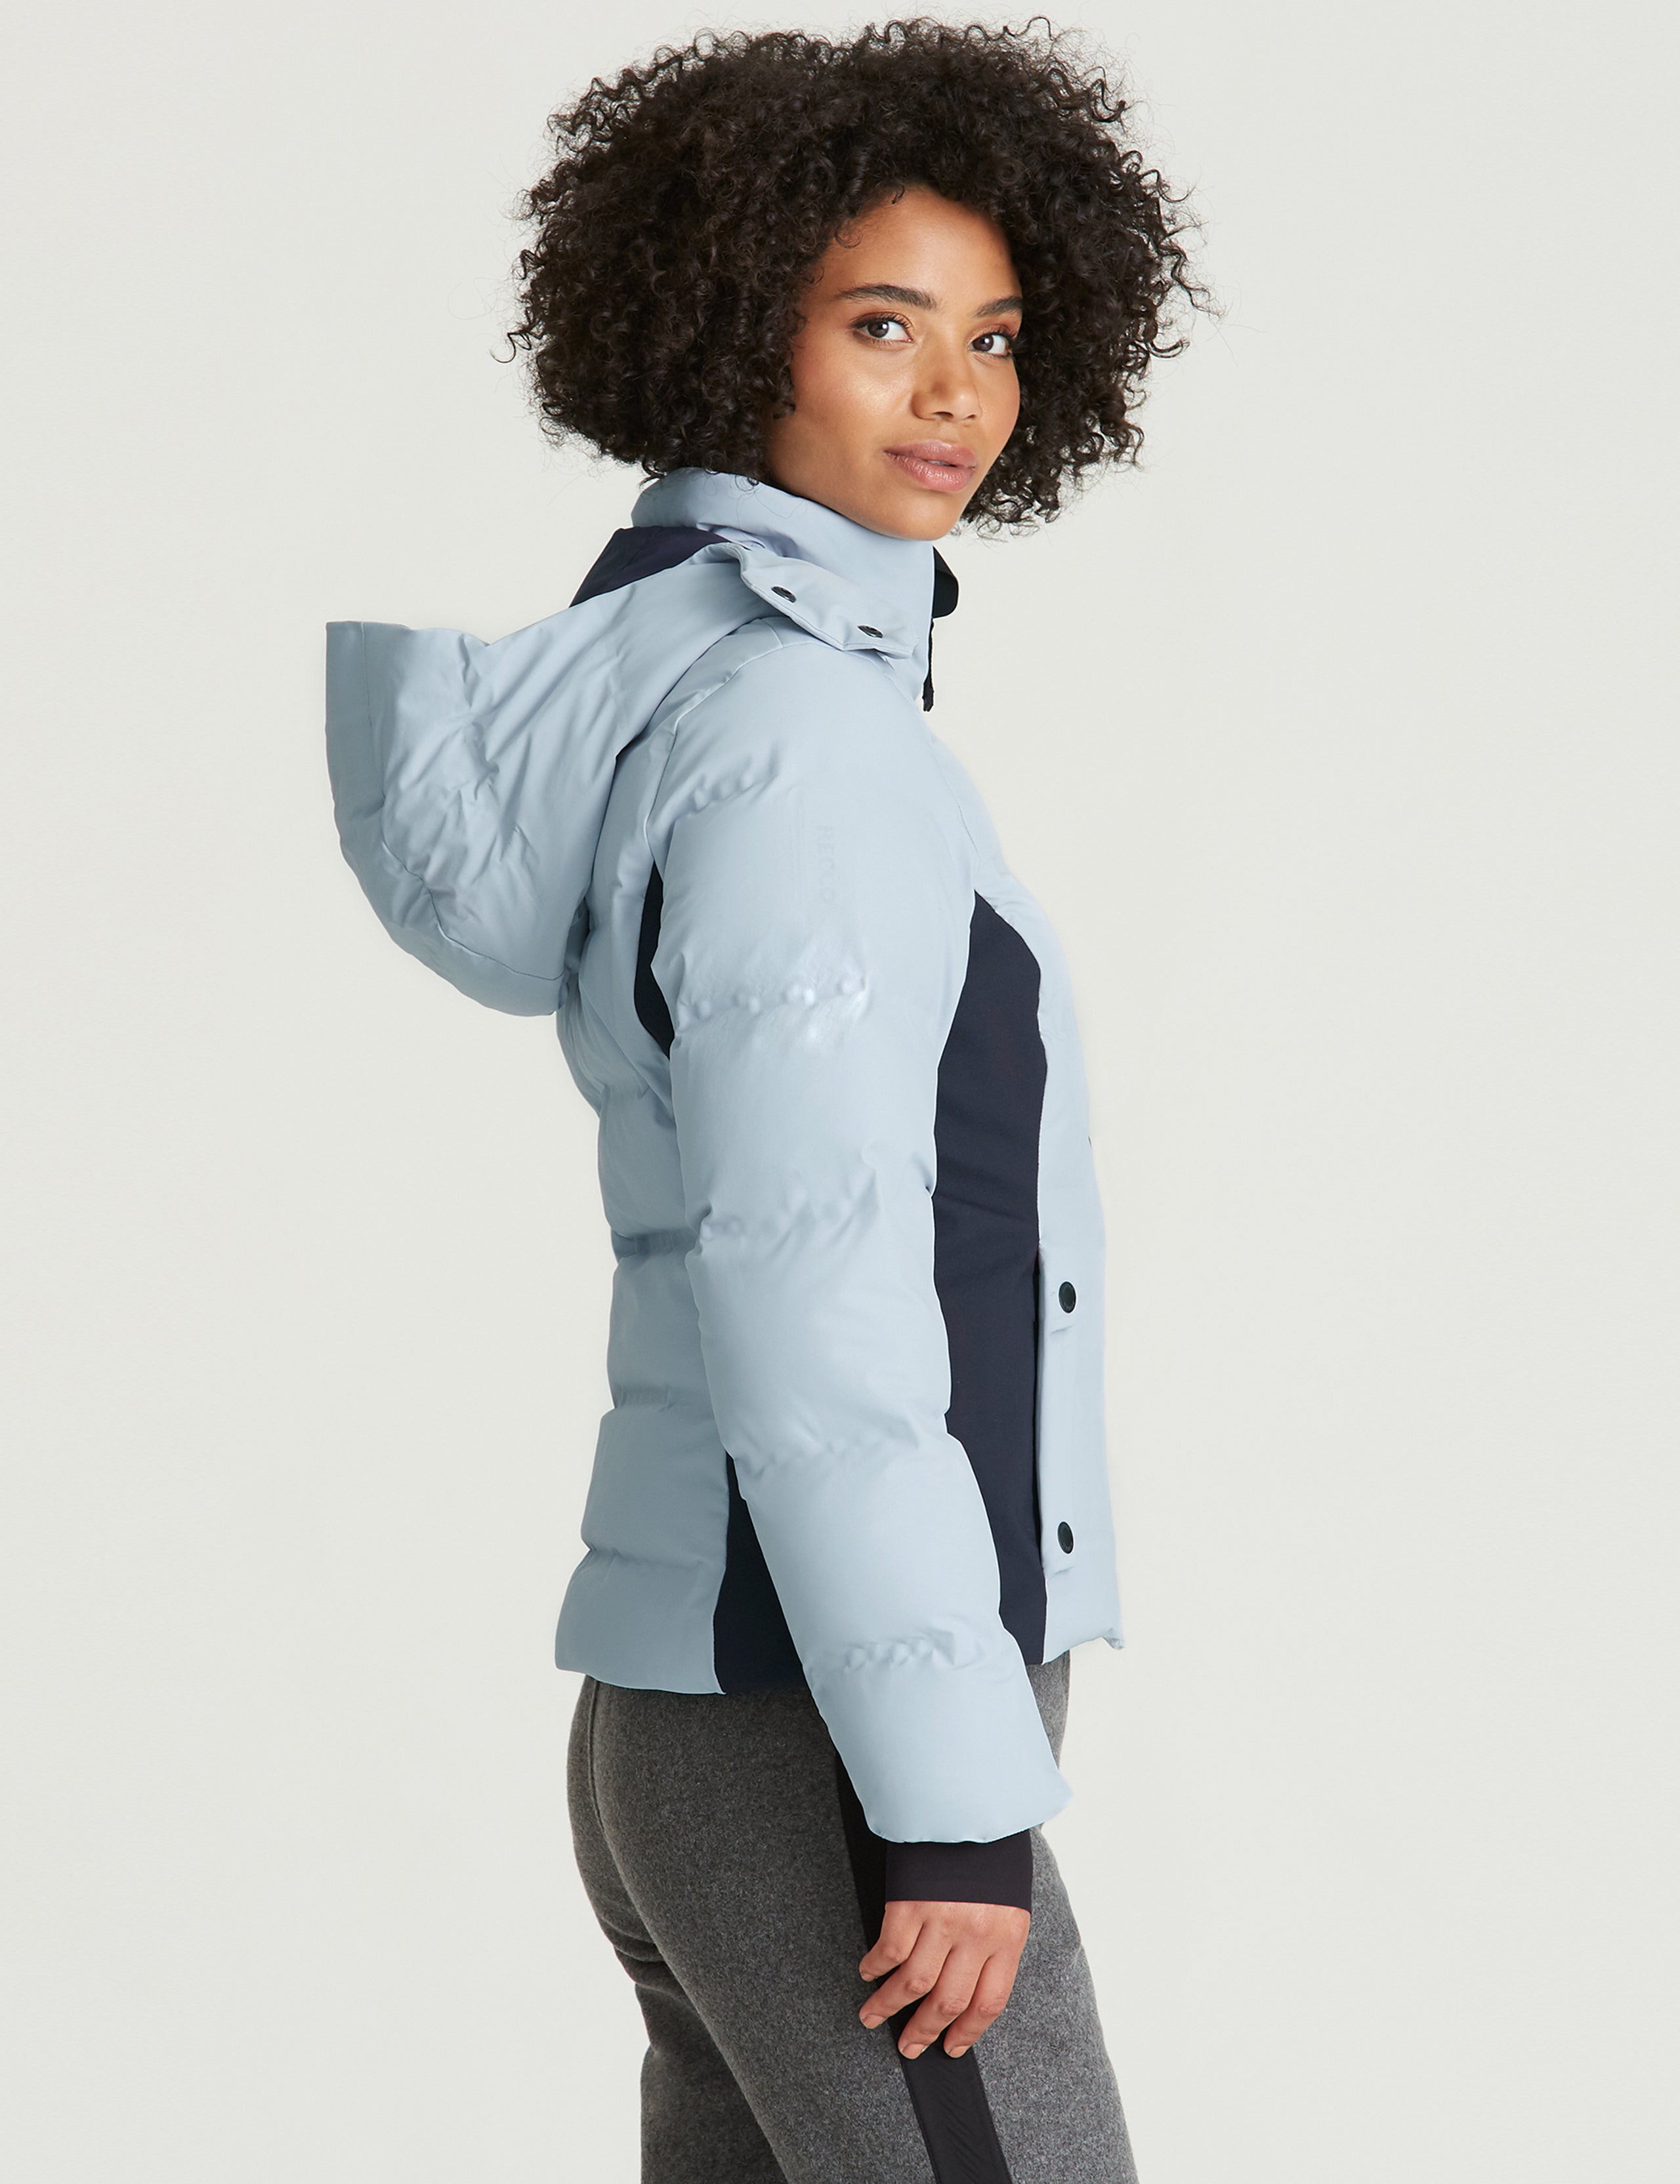 woman wearing light blue ski jacket from Aether Apparel